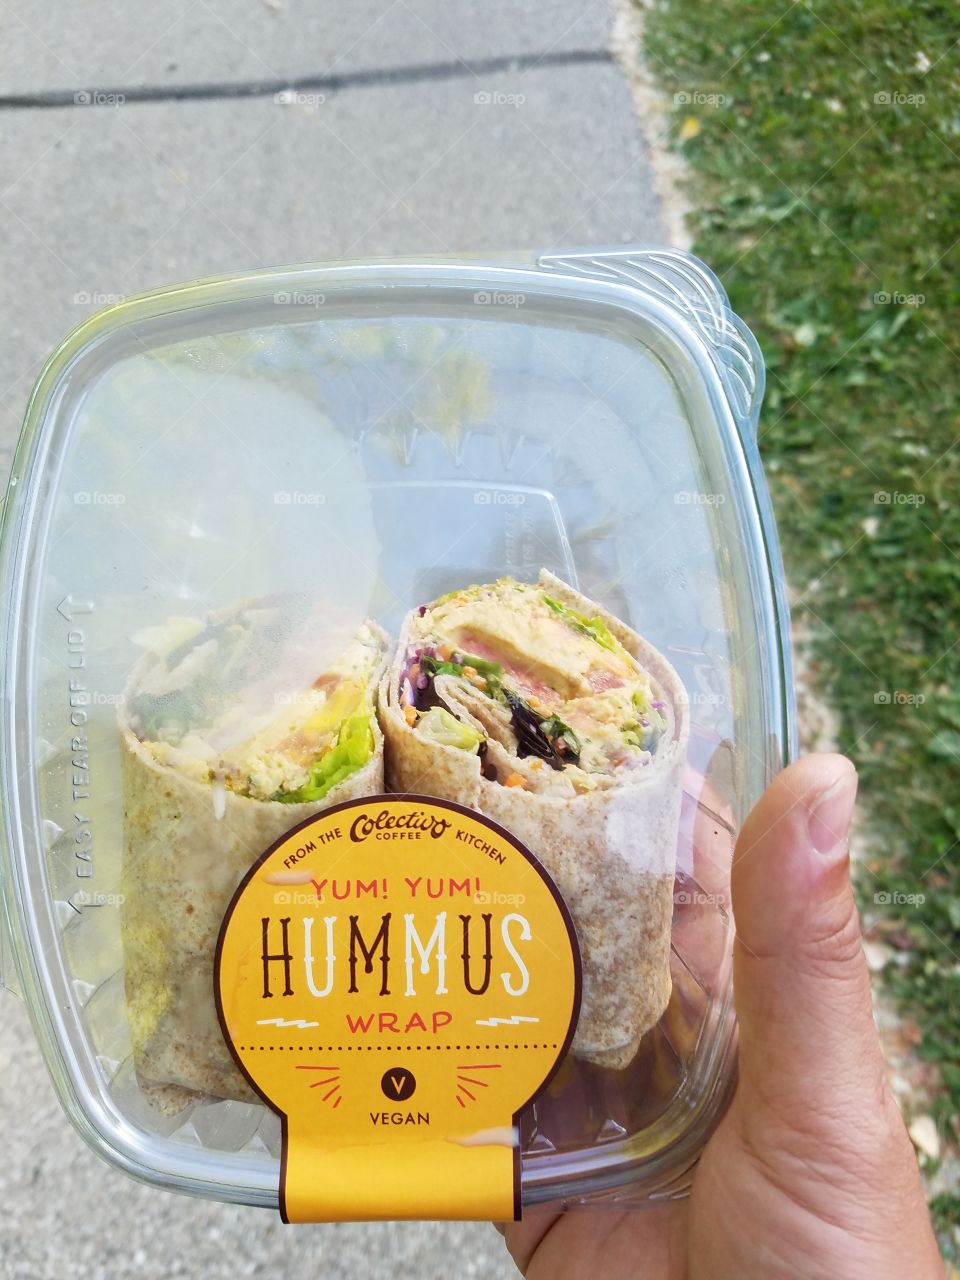 Hummus for Lunch